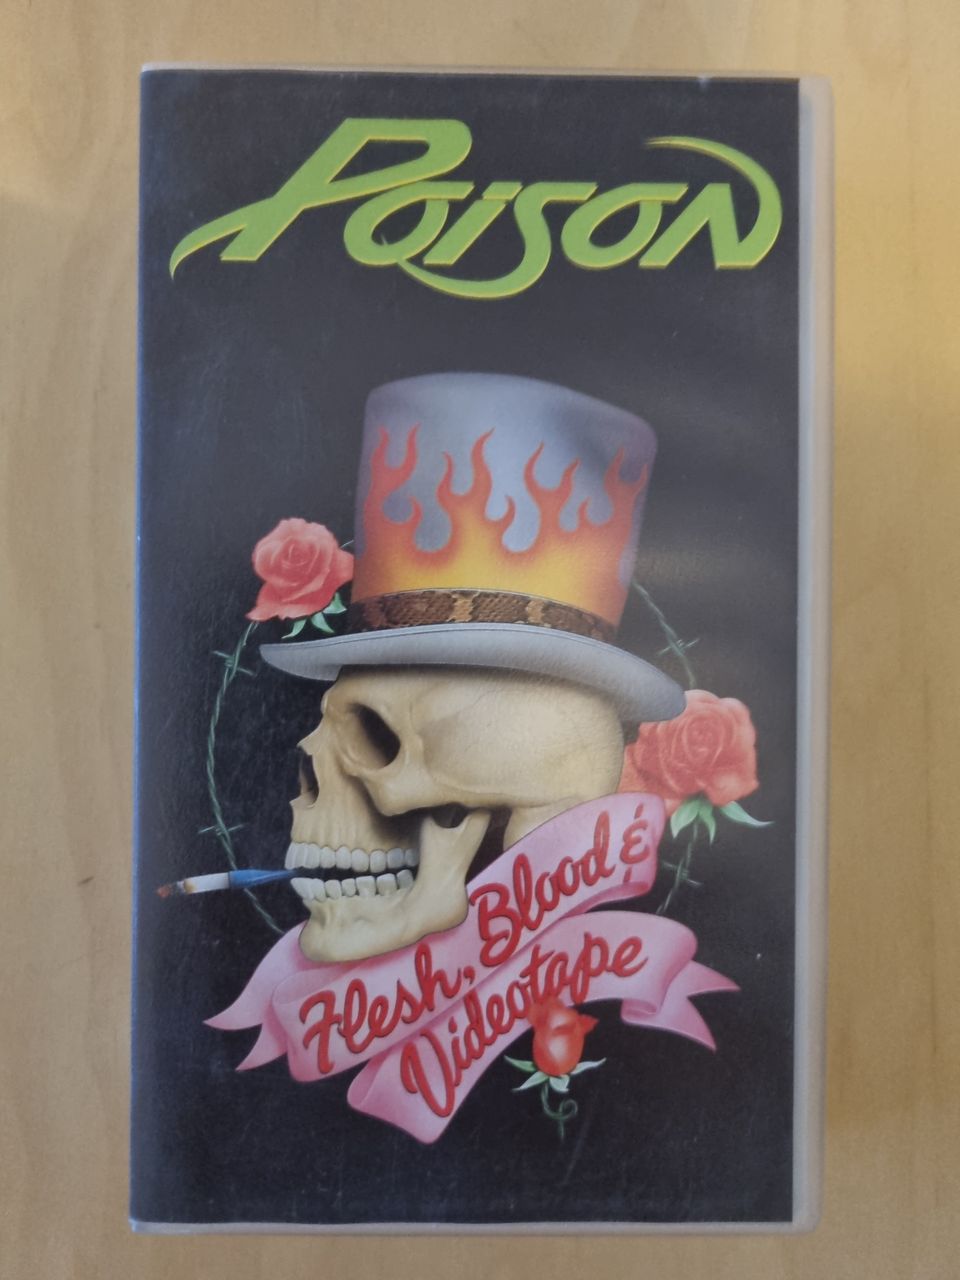 Poison video vhs